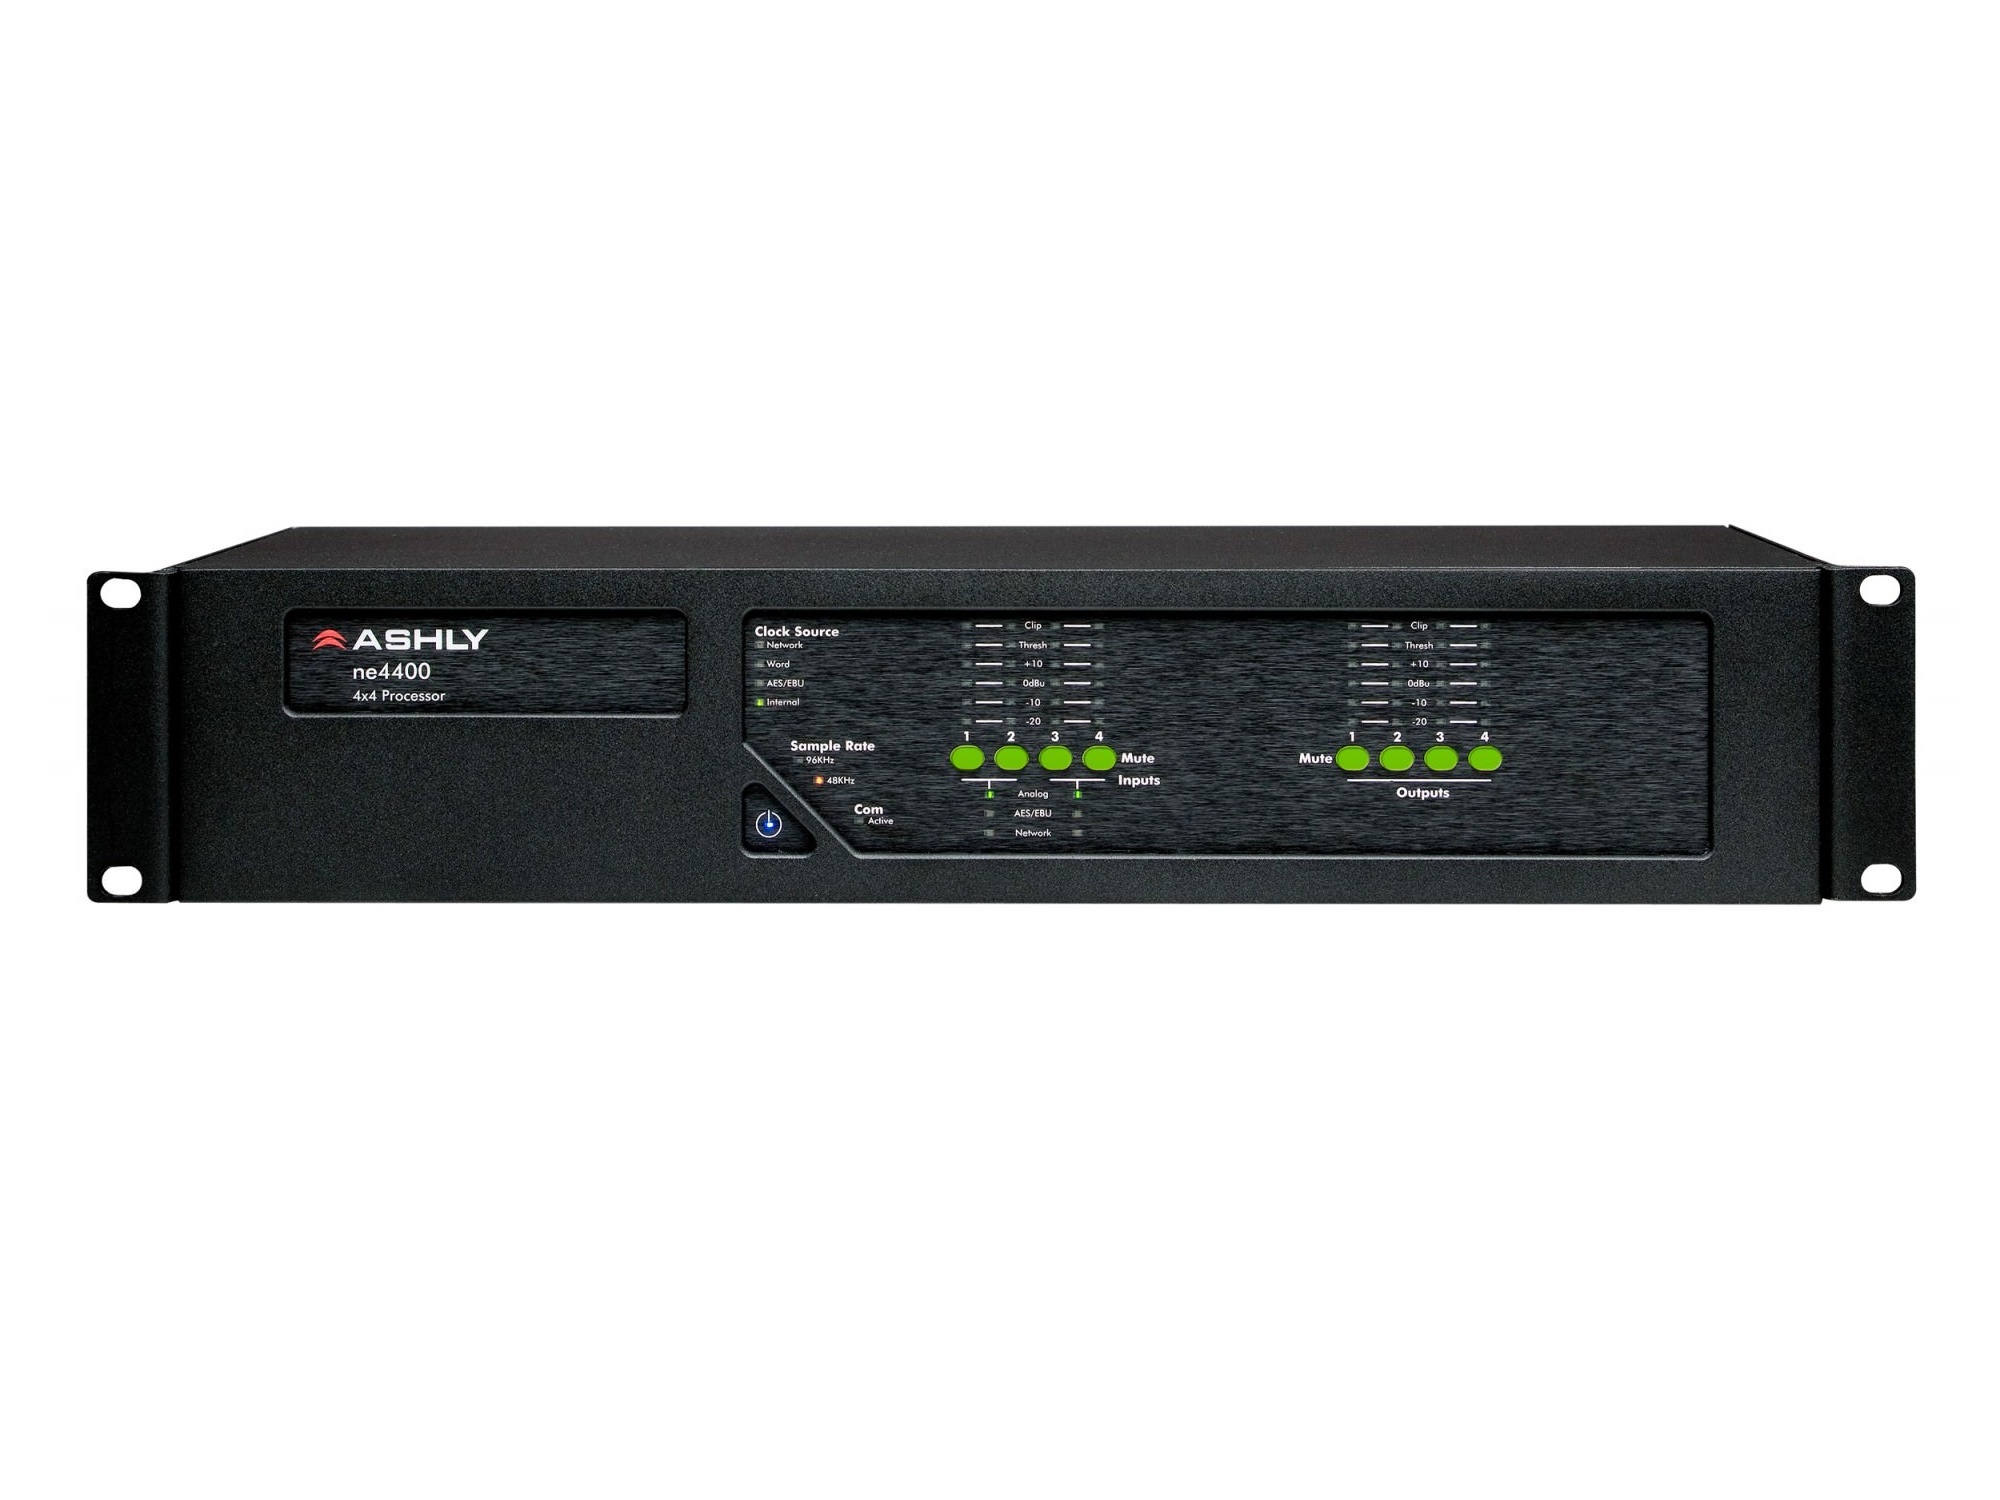 ne4400as ne4400 Network Protea System Processor plus 4-Chan AES3 Inputs and 4-Chan AES3 Outputs by Ashly